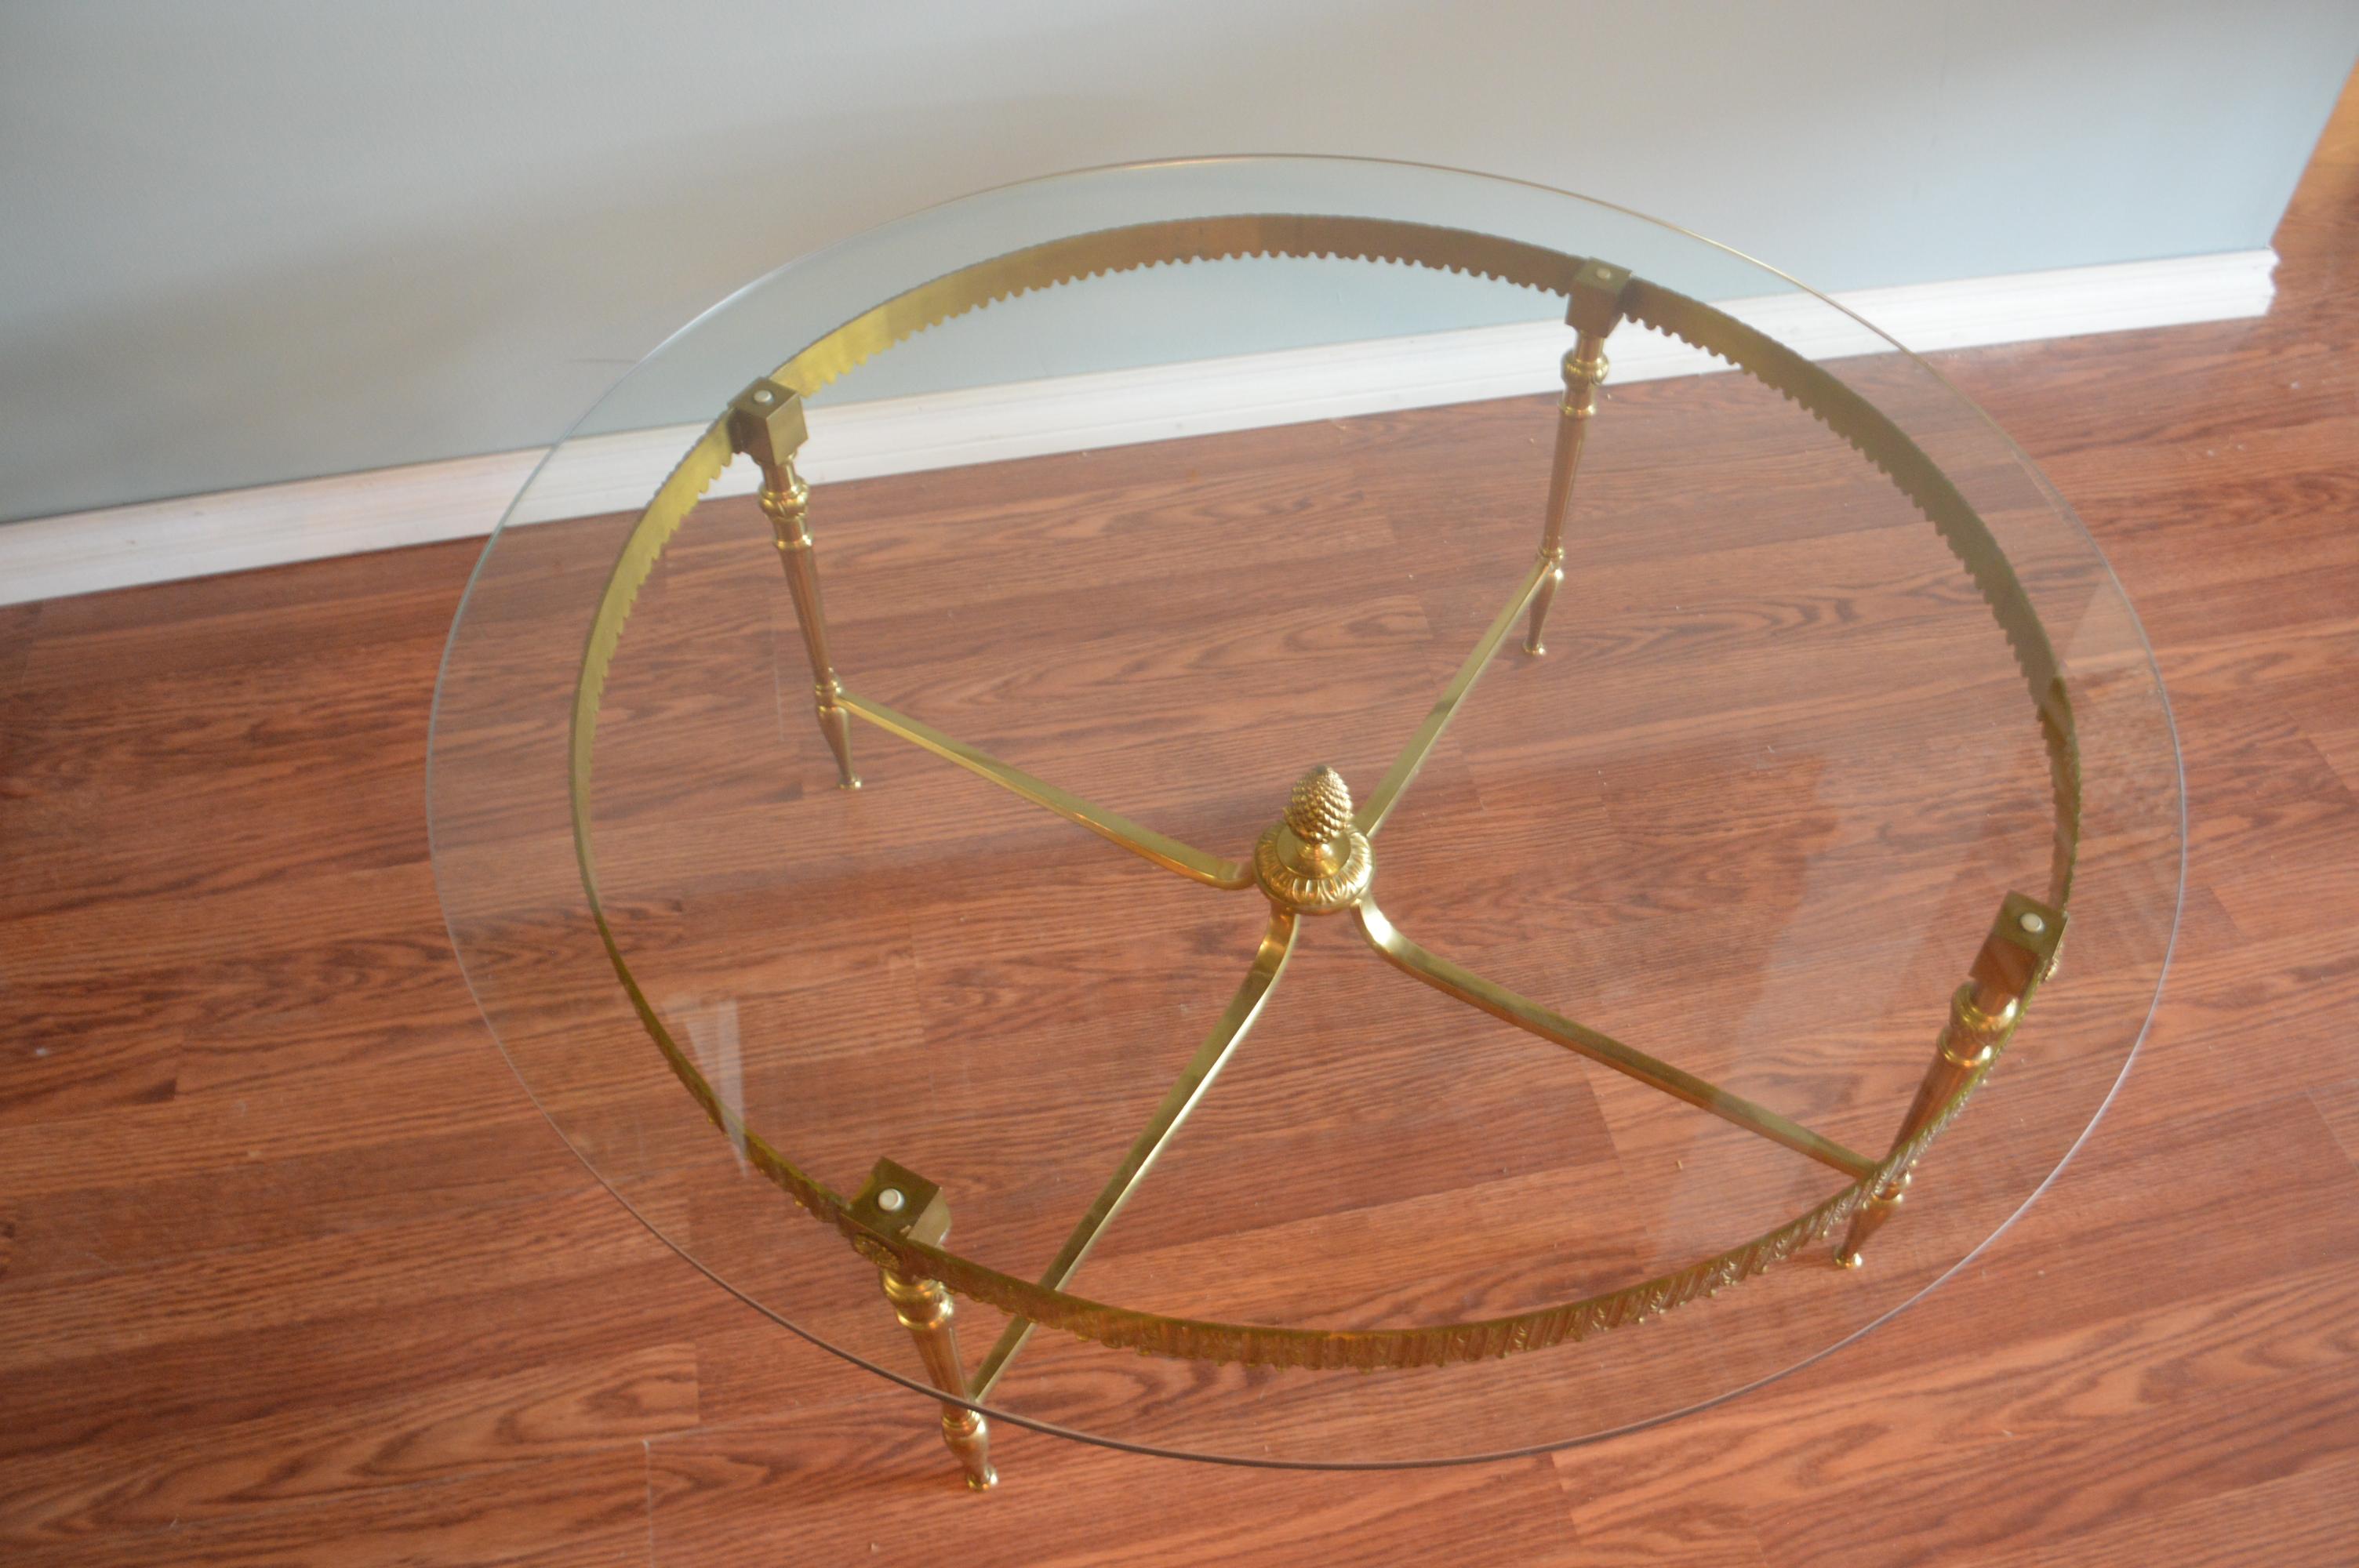 Gilt Brass Round Coffee Table with Ornate Apron, Brass Pineapple at Base, Round For Sale